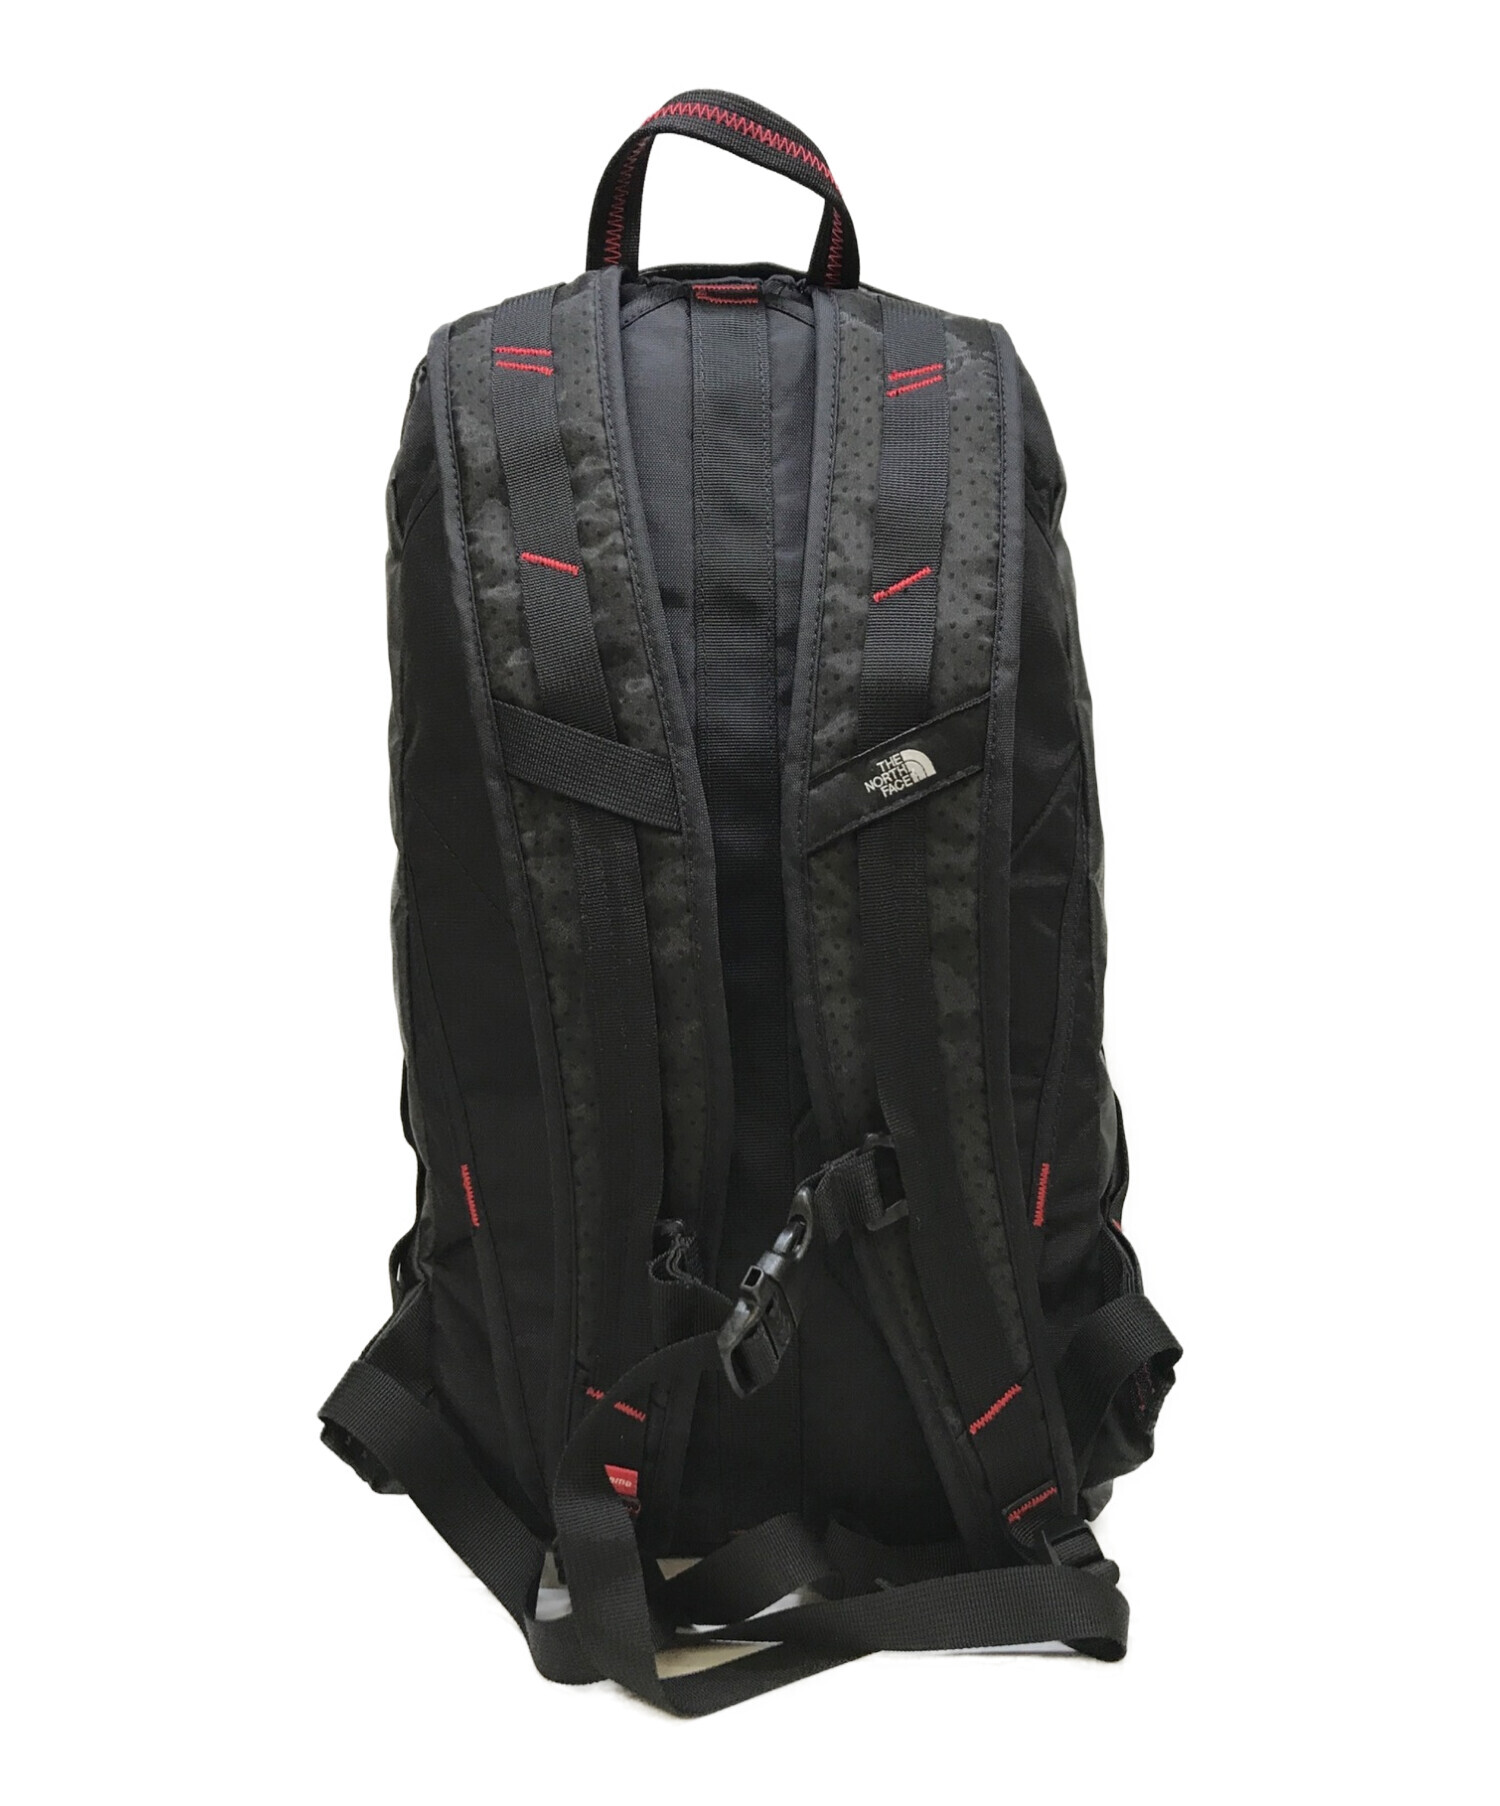 THE NORTH FACE (ザ ノース フェイス) SUPREME (シュプリーム) Summit Series Outer Tape Seam  Route Rocket Backpack ブラック